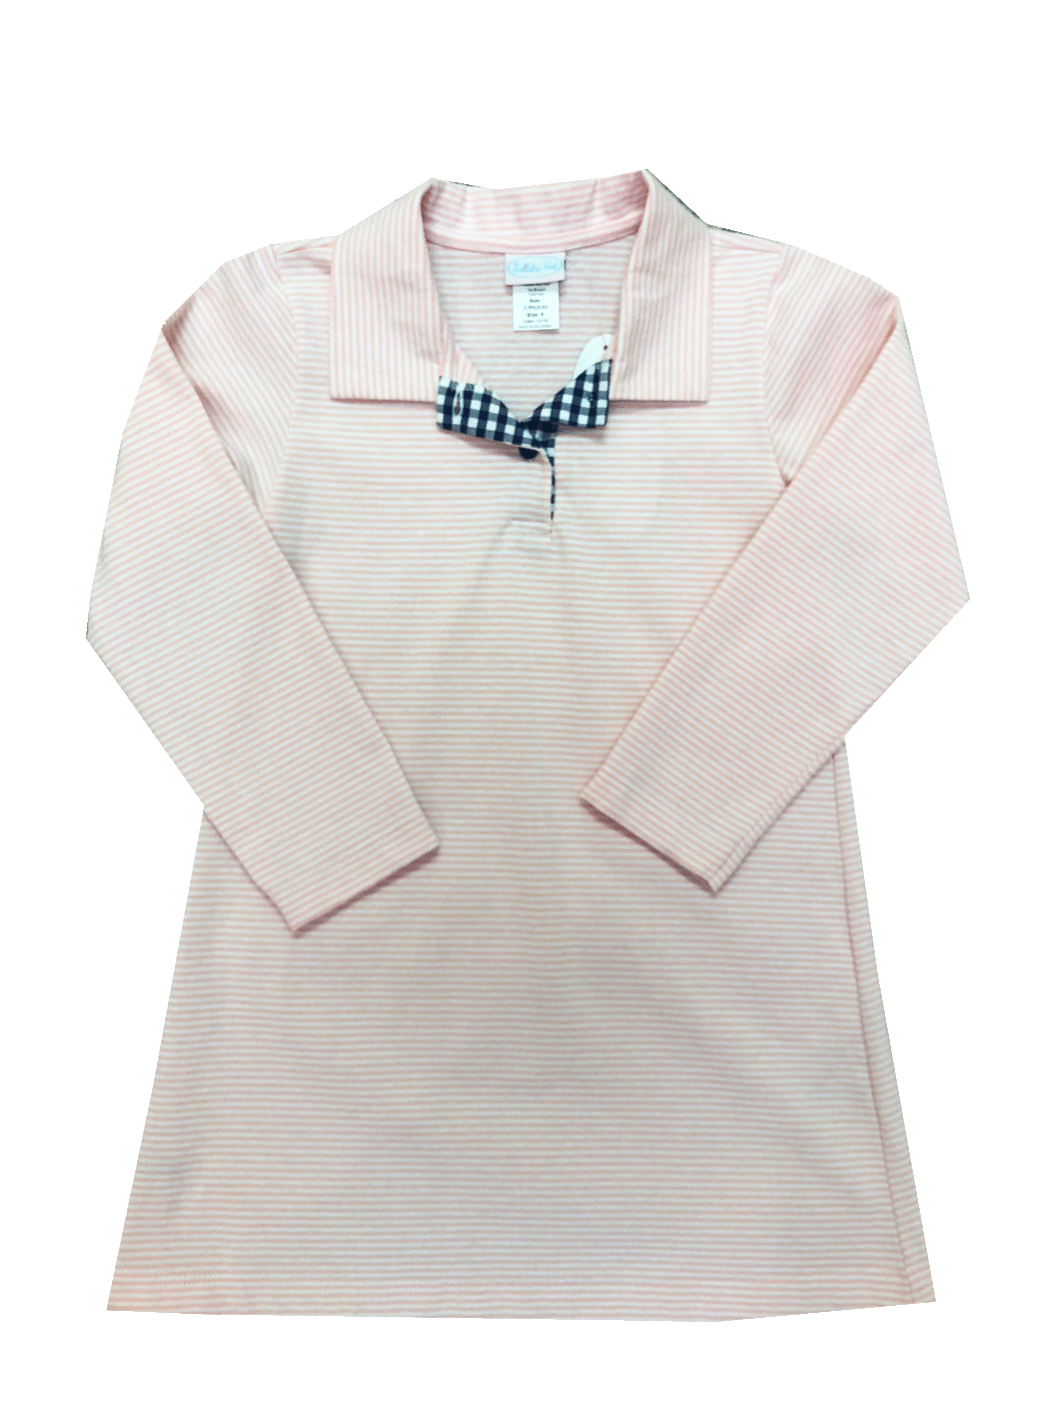 Pink Knit Polo Dress w Navy Gingham